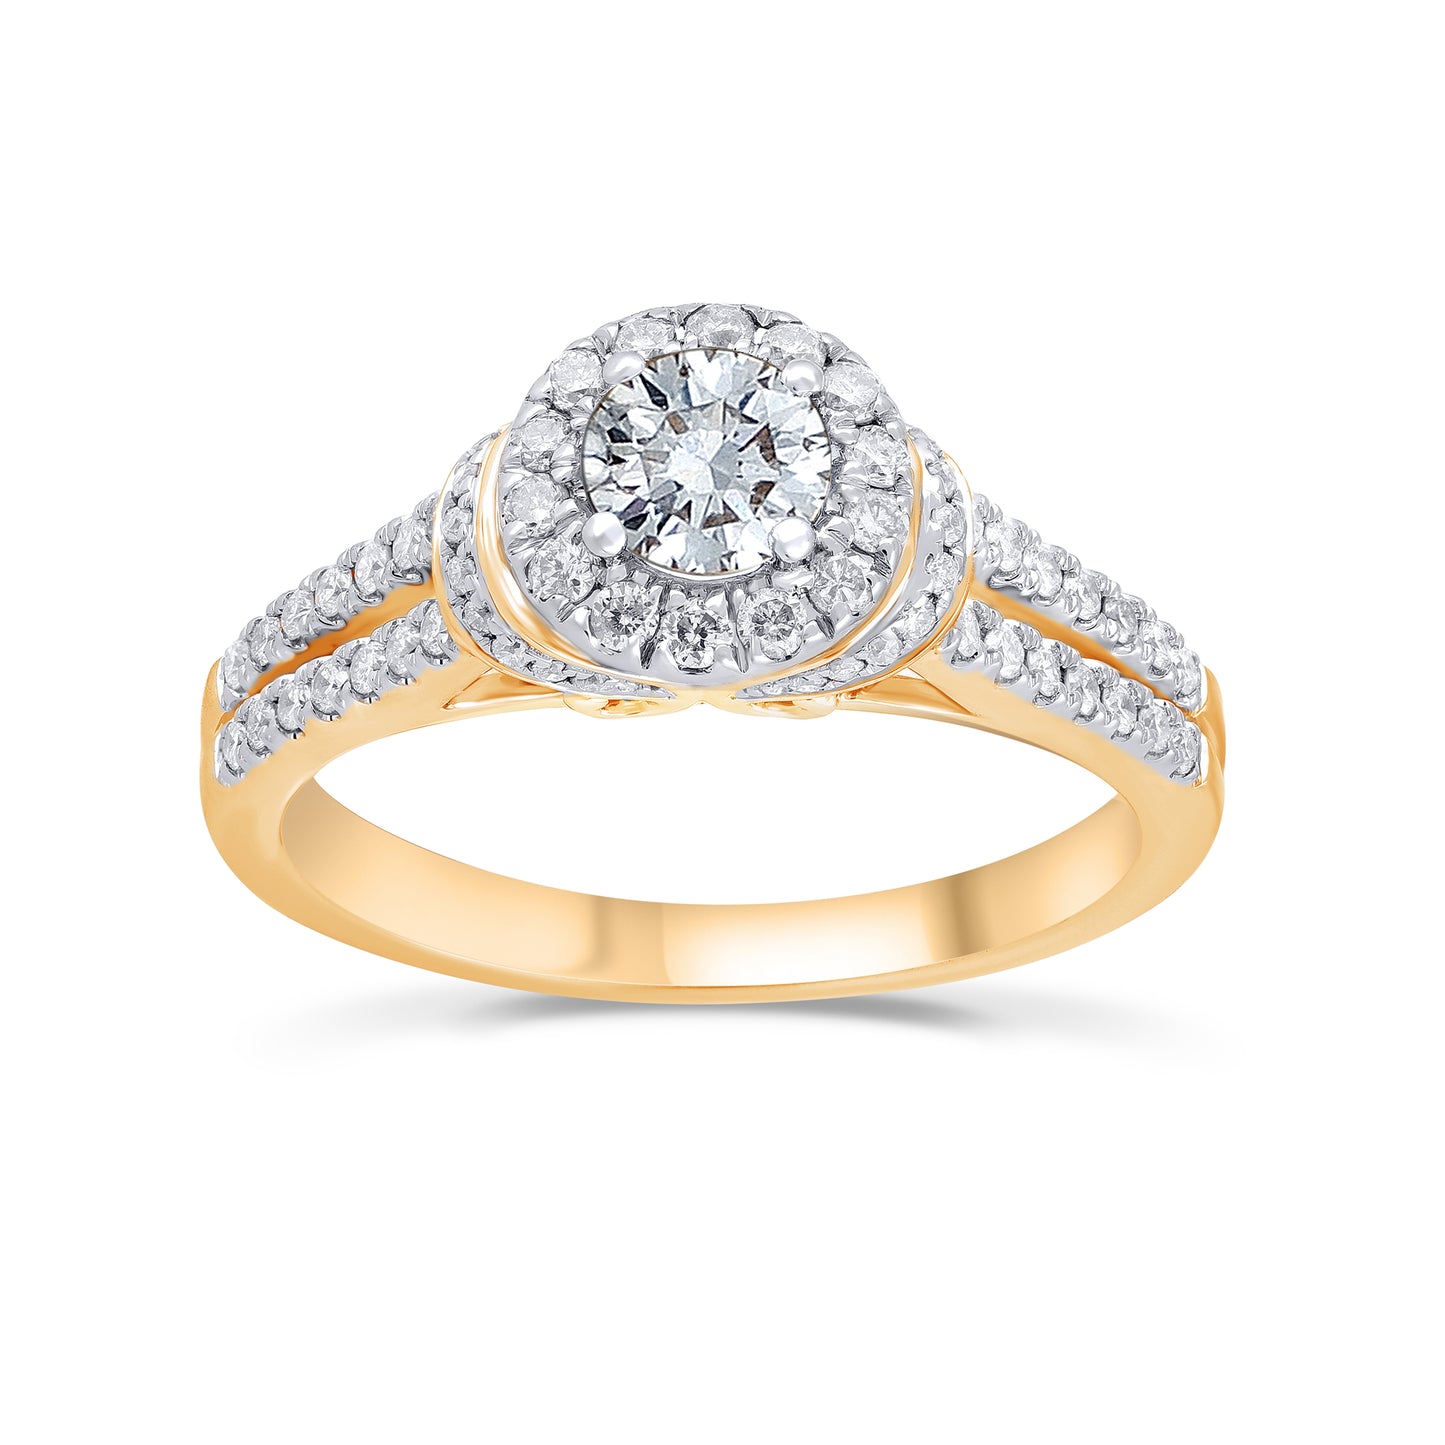 Halo Engagement Ring in 14K Gold